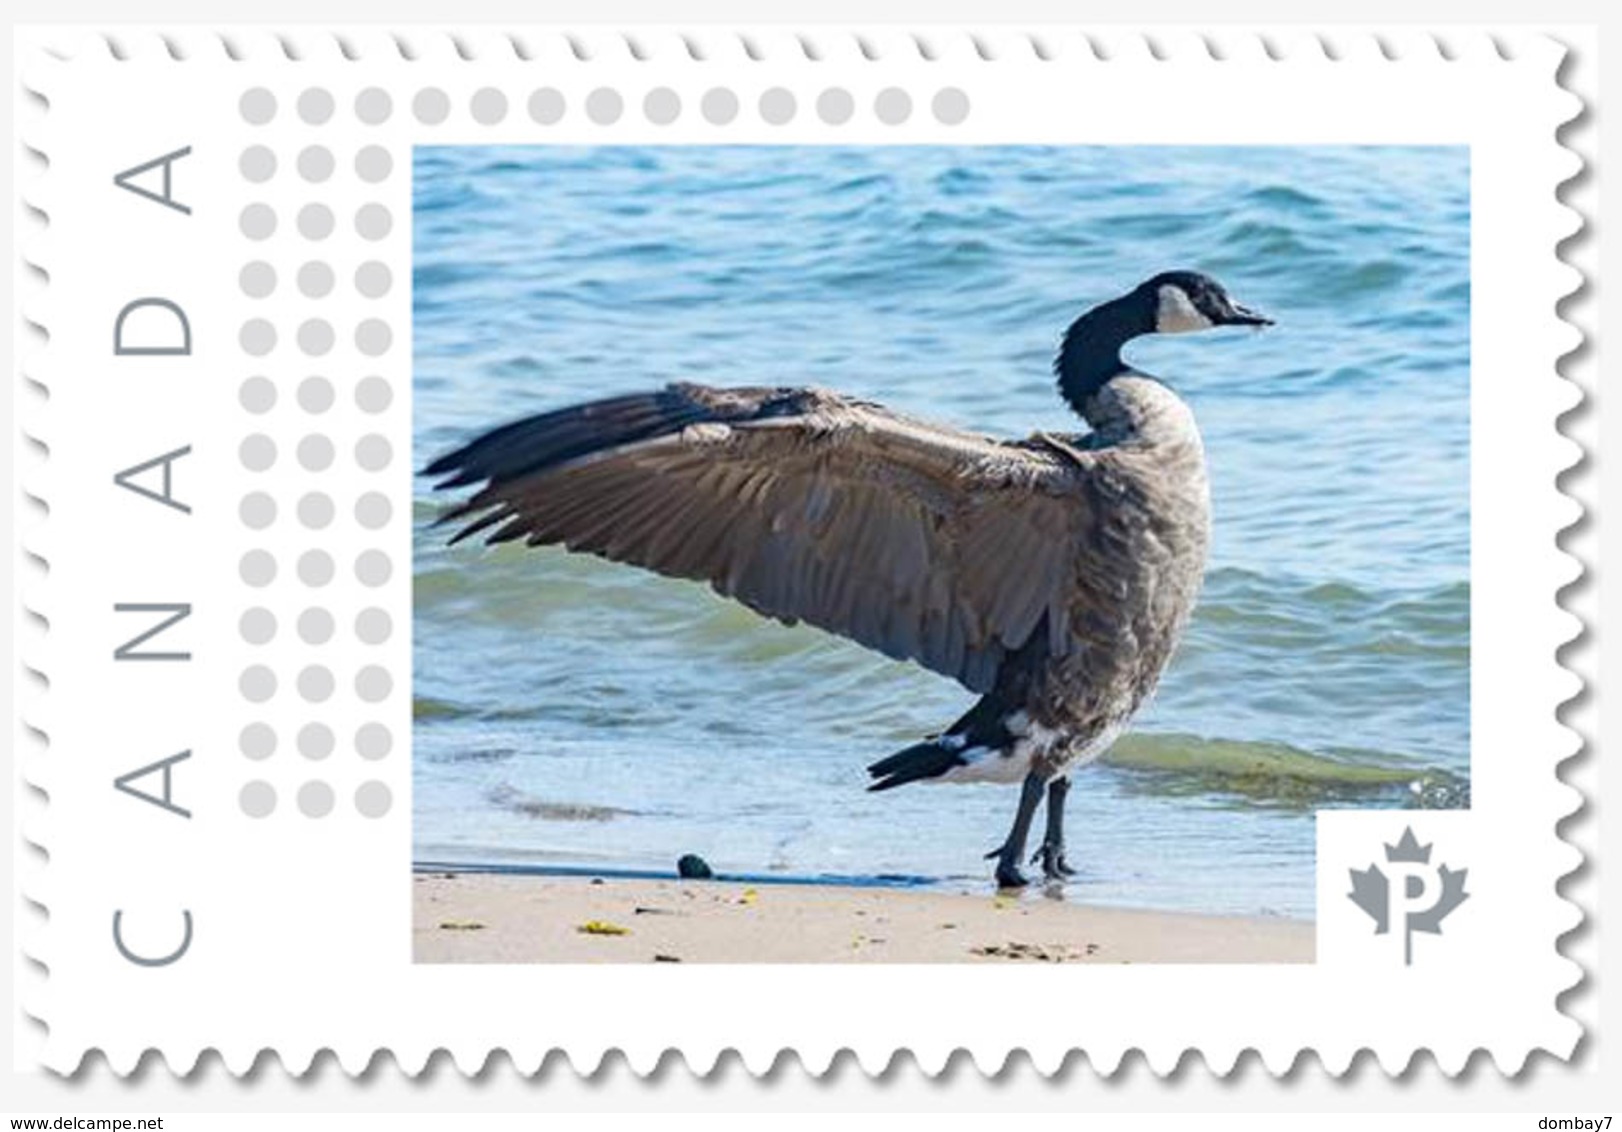 CANADA GOOSE = Waterfowl = Bird = Picture Postage MNH-VF Canada 2019 [p19-01s16] - Oies